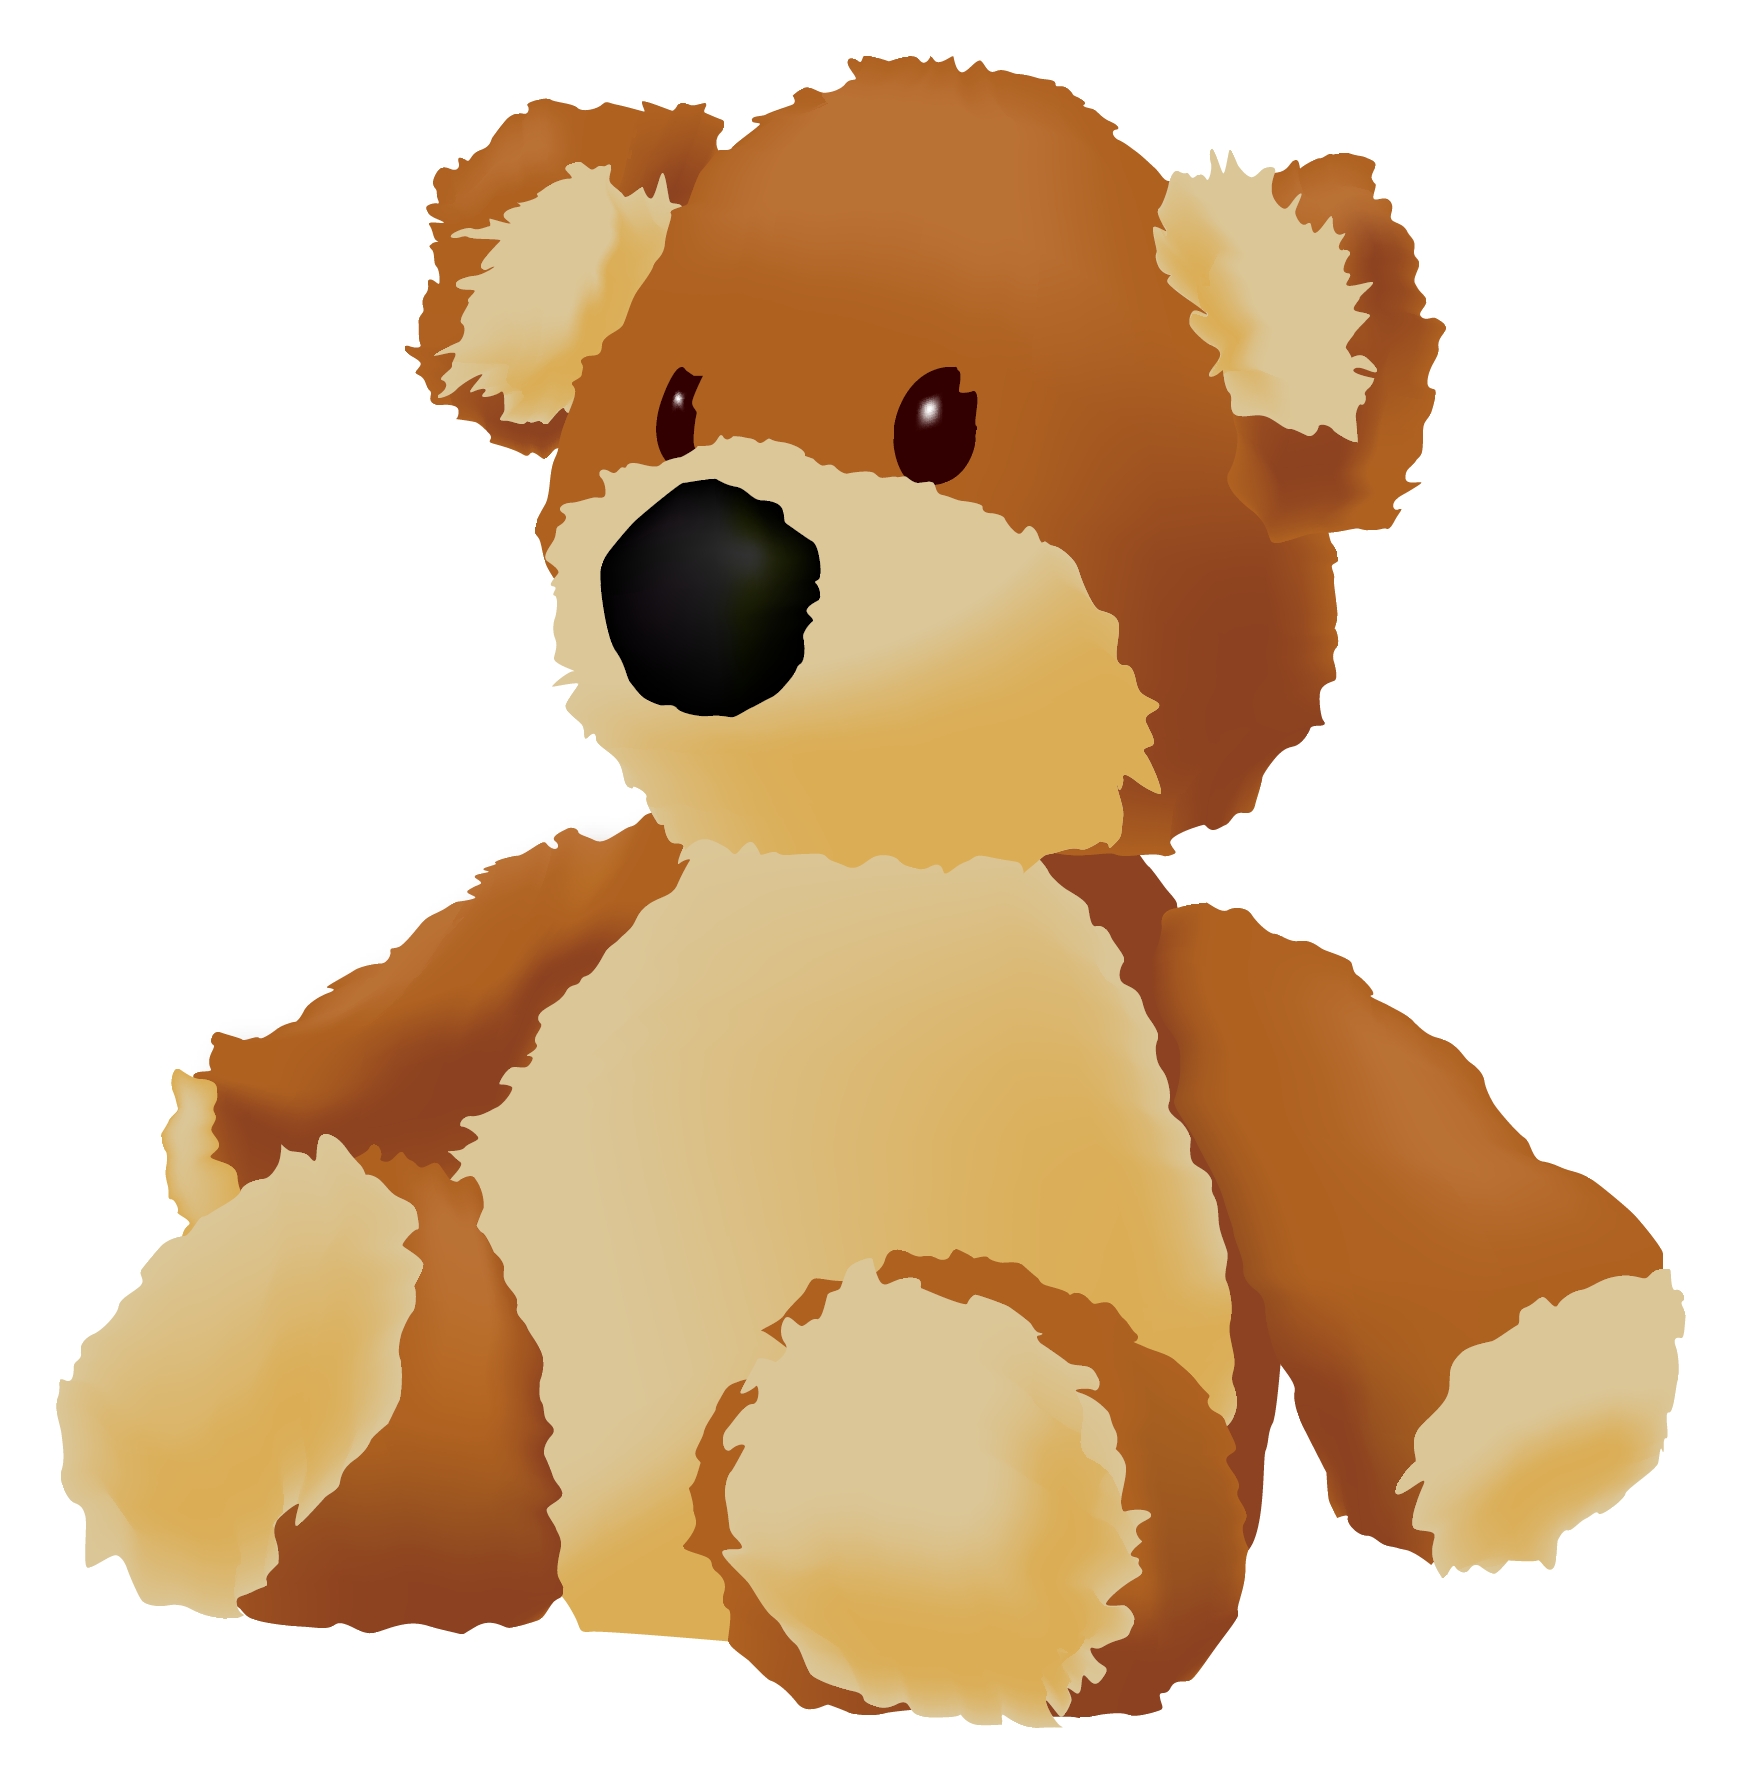 Cartoon Pictures Of Teddy Bears - Wallpapers HD Fine